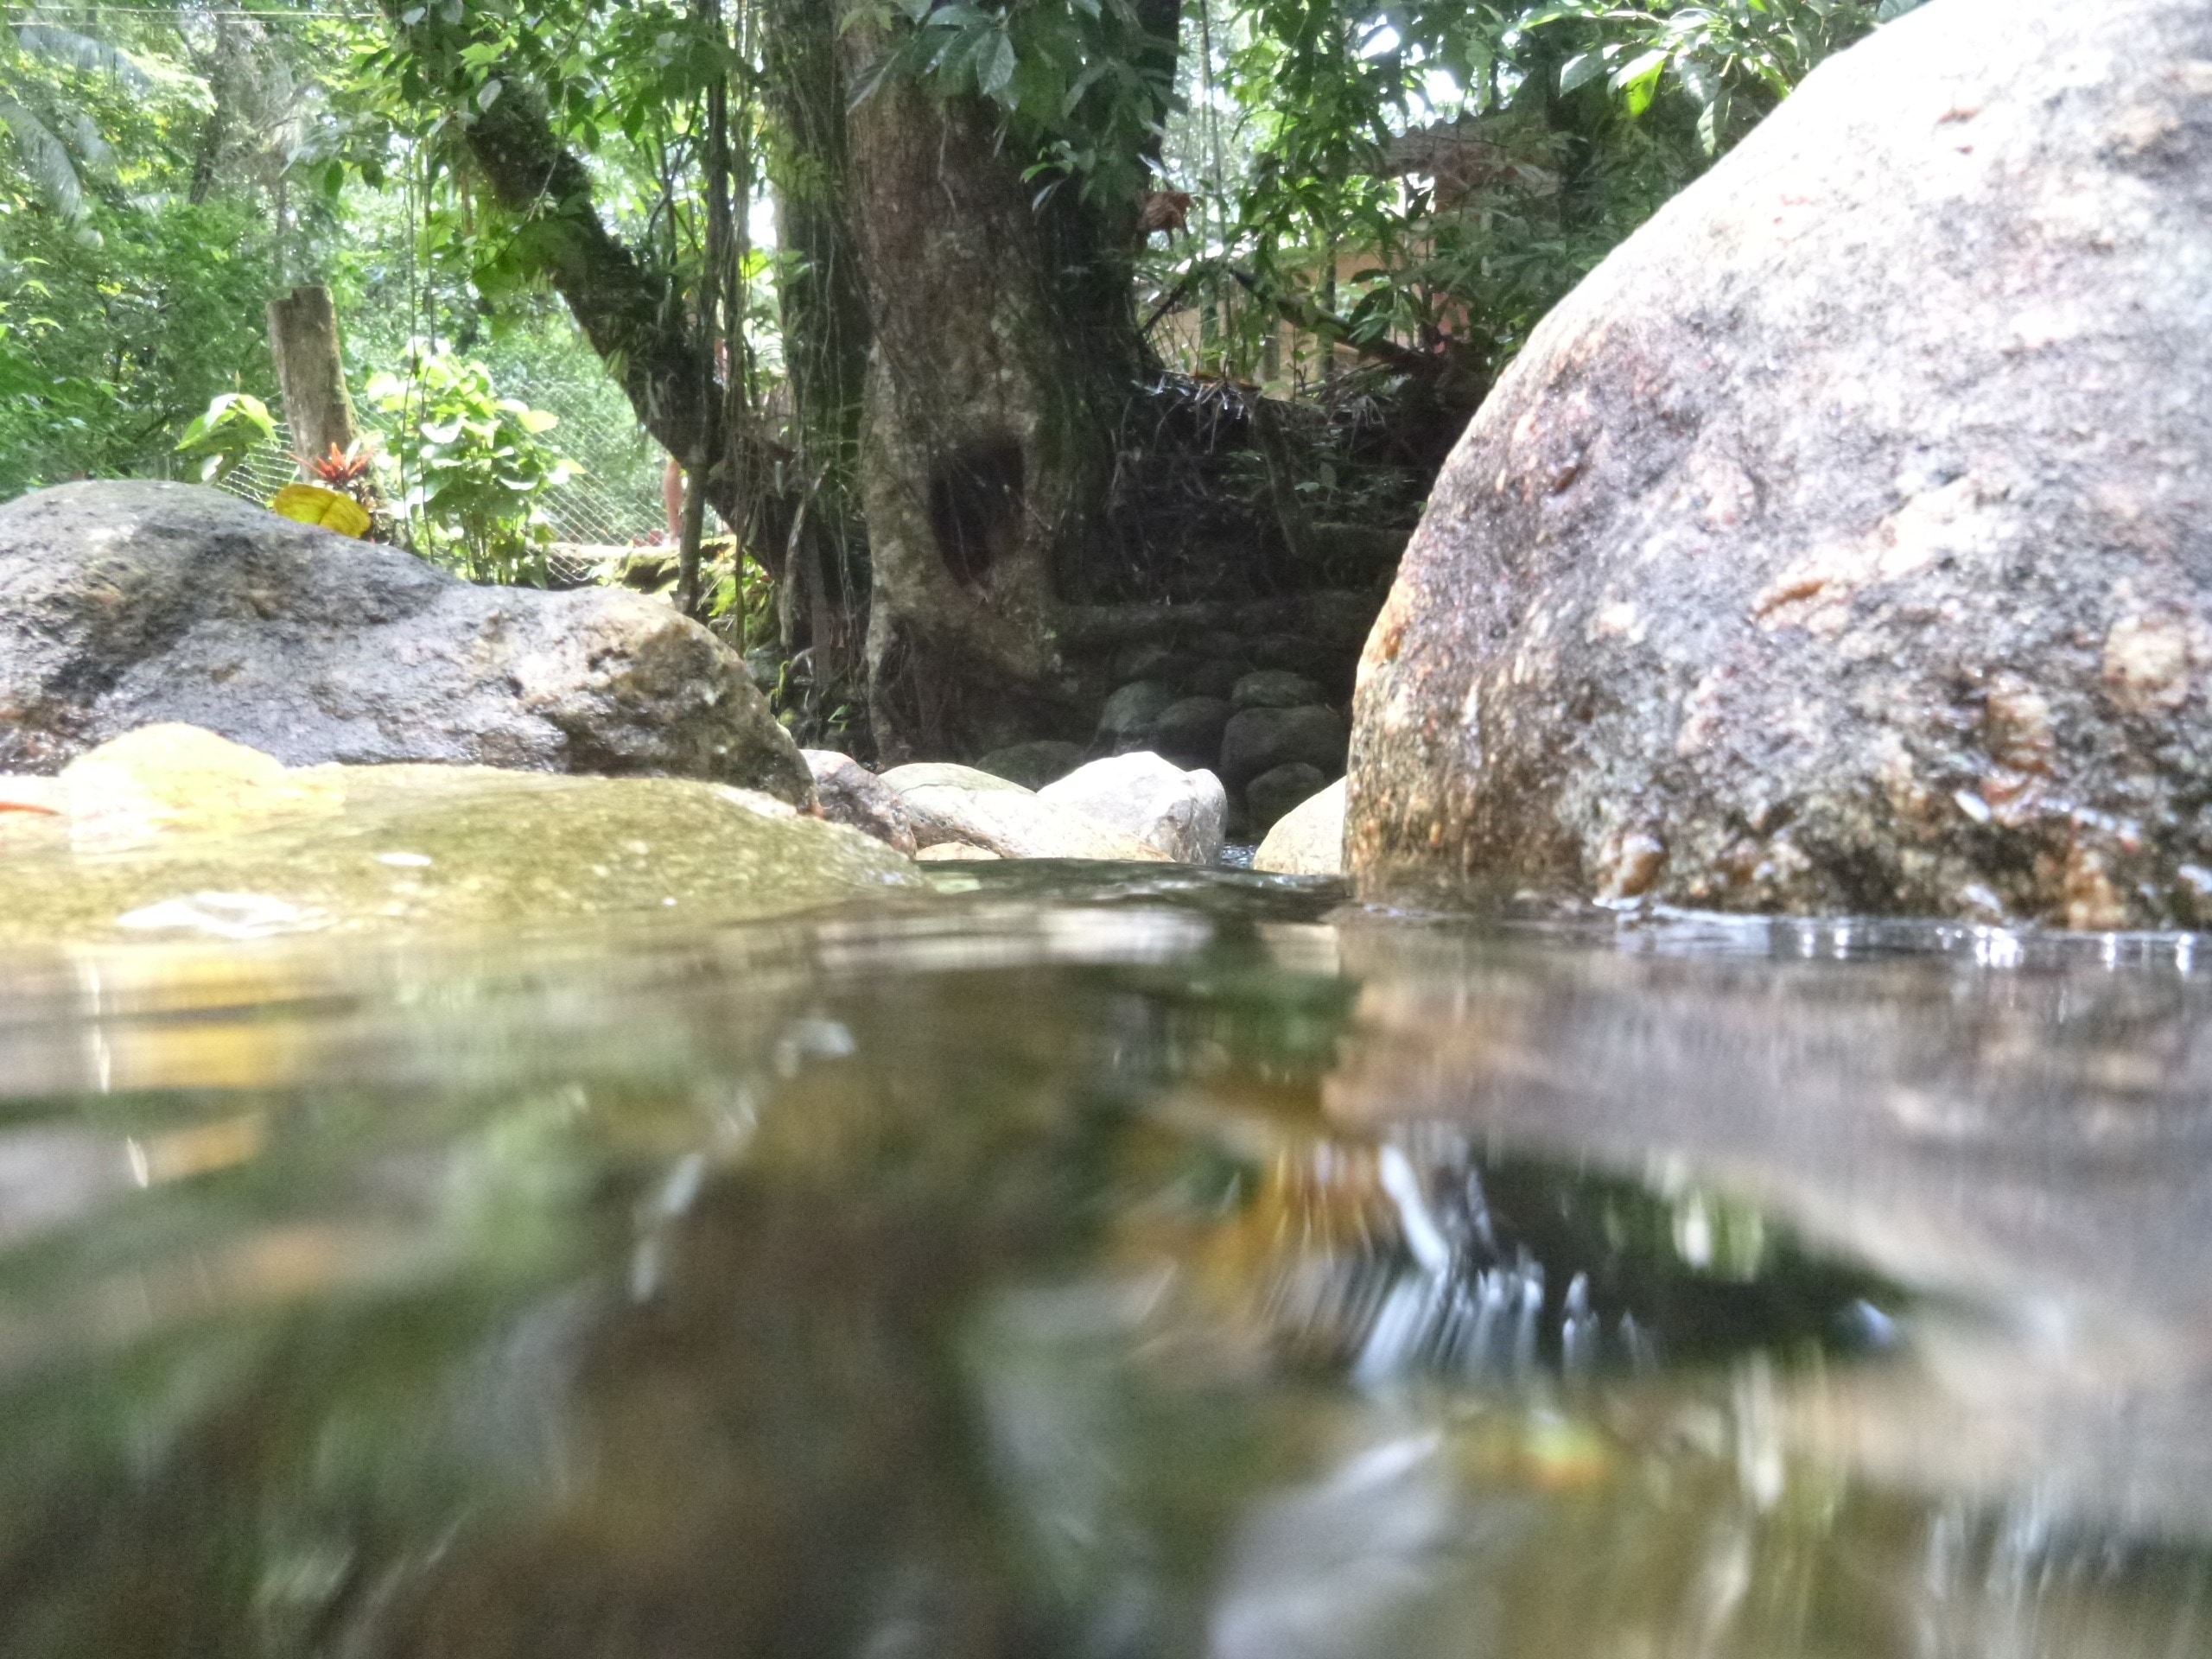 Nature, Agua, Stone, Rio, Water, reflection, water